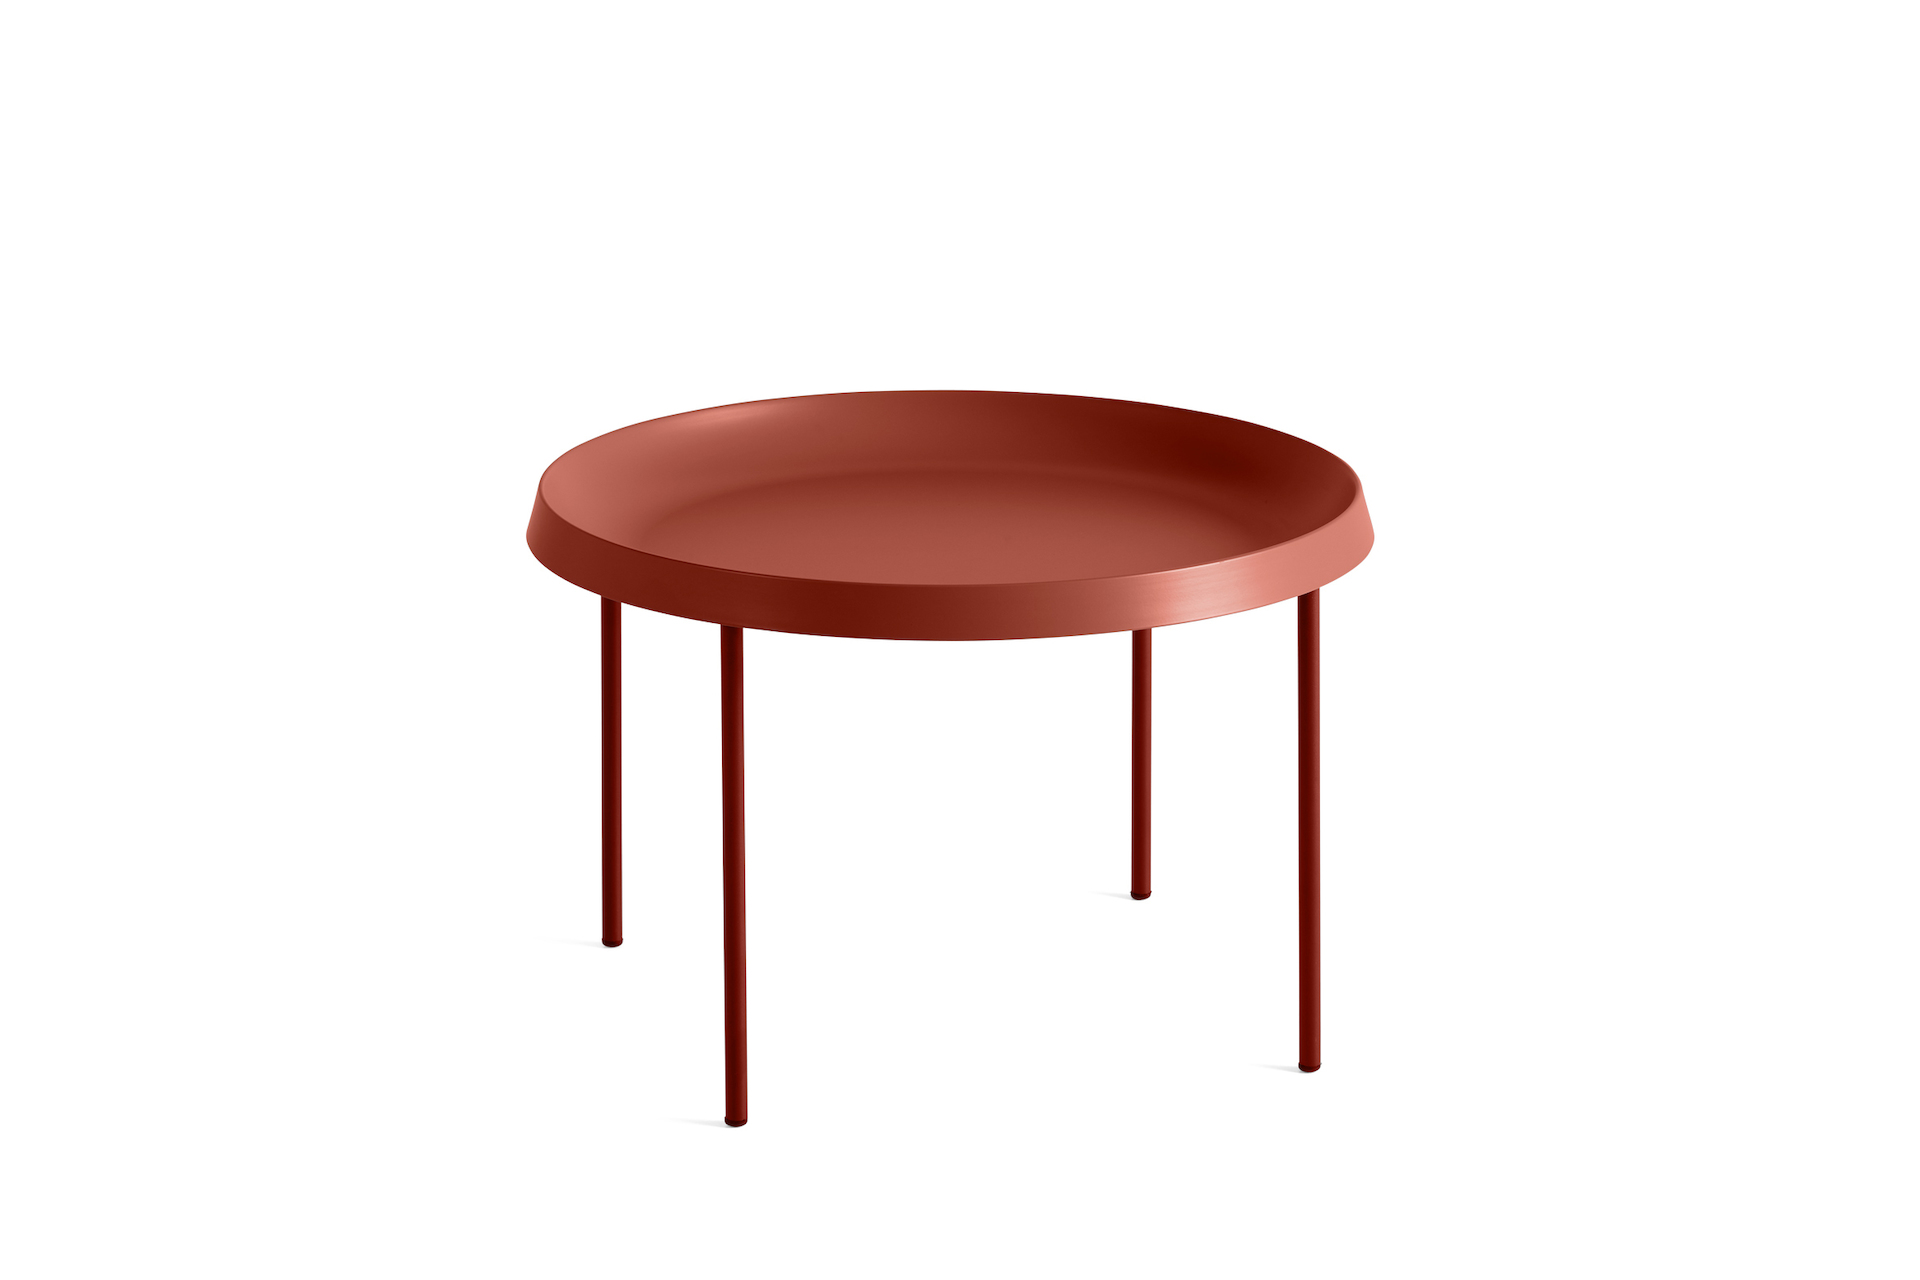 Tulou Coffee Table - 3D Product Models - Herman Miller